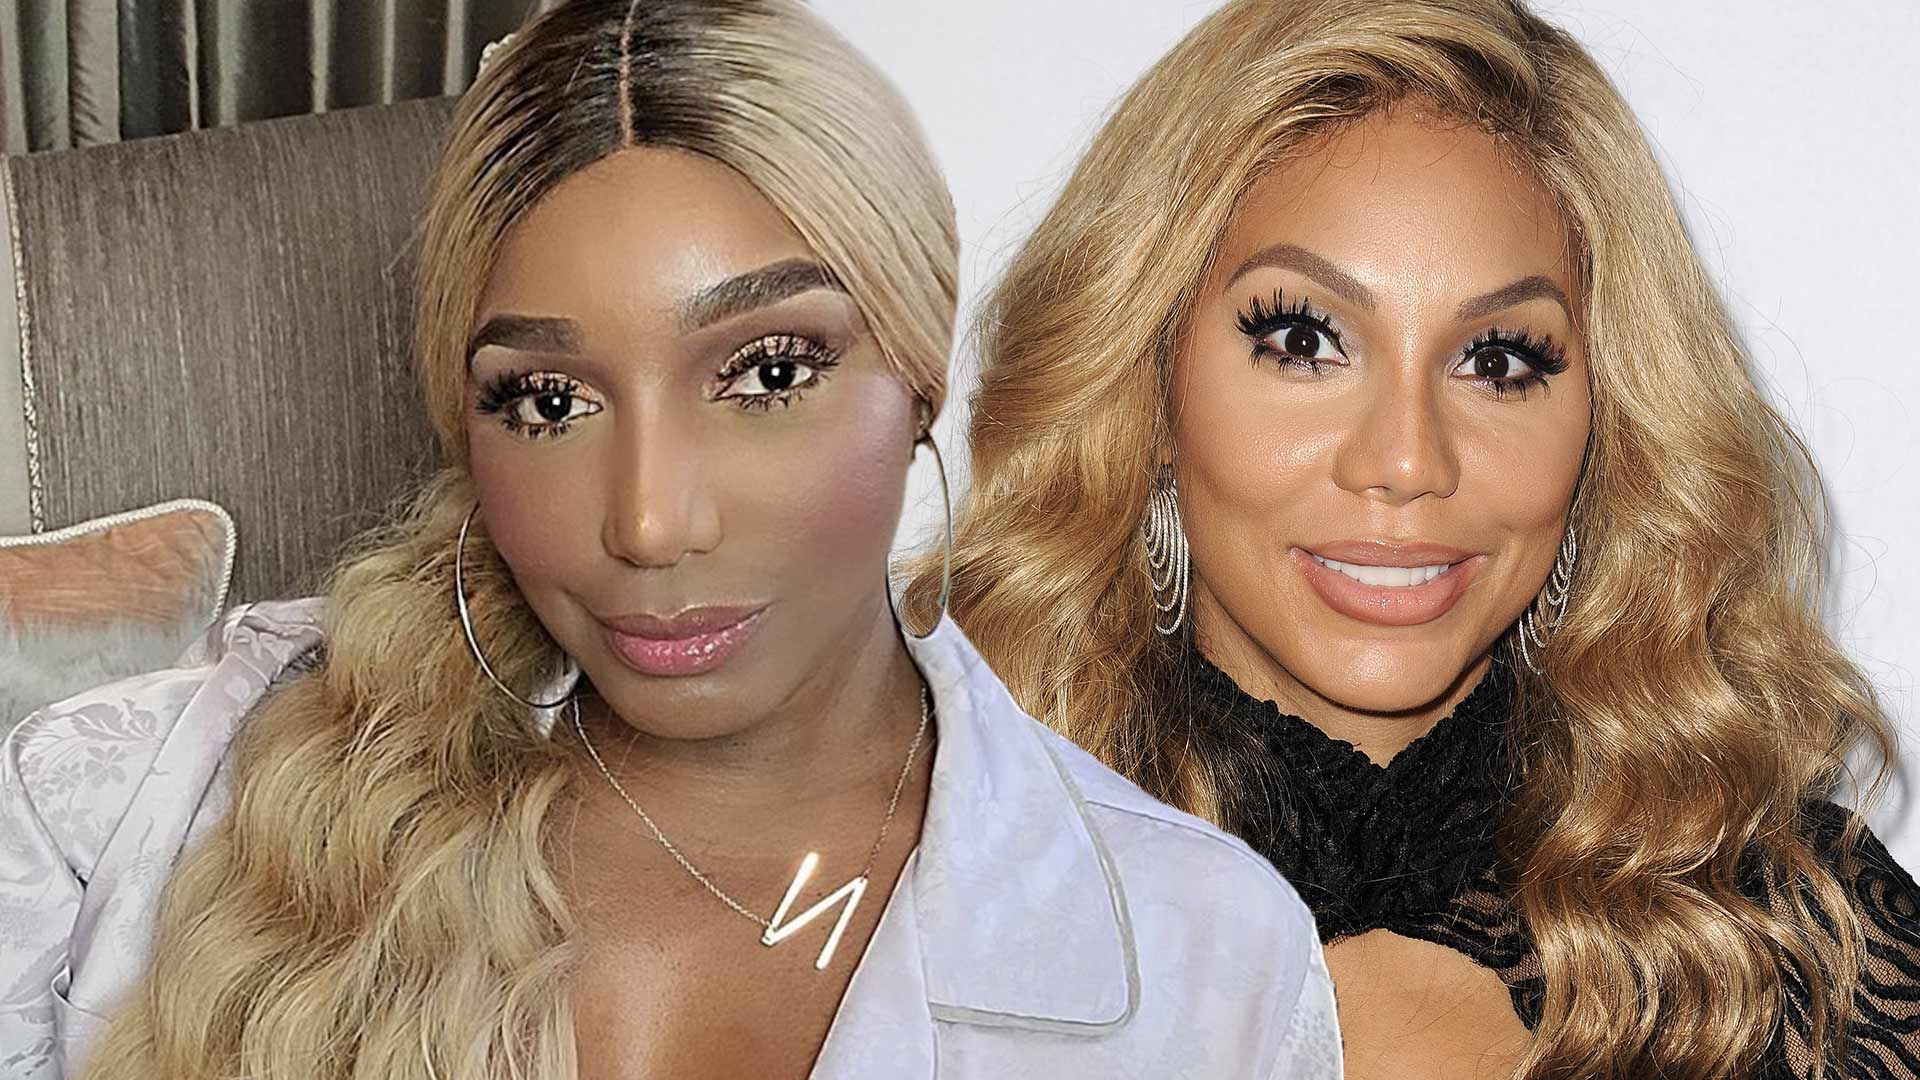 Tamar Braxton And Nene Leakes Bond Over Why They Left Reality TV — Tamar Reveals That She Heard WE TV Got Her Fired From The Real!